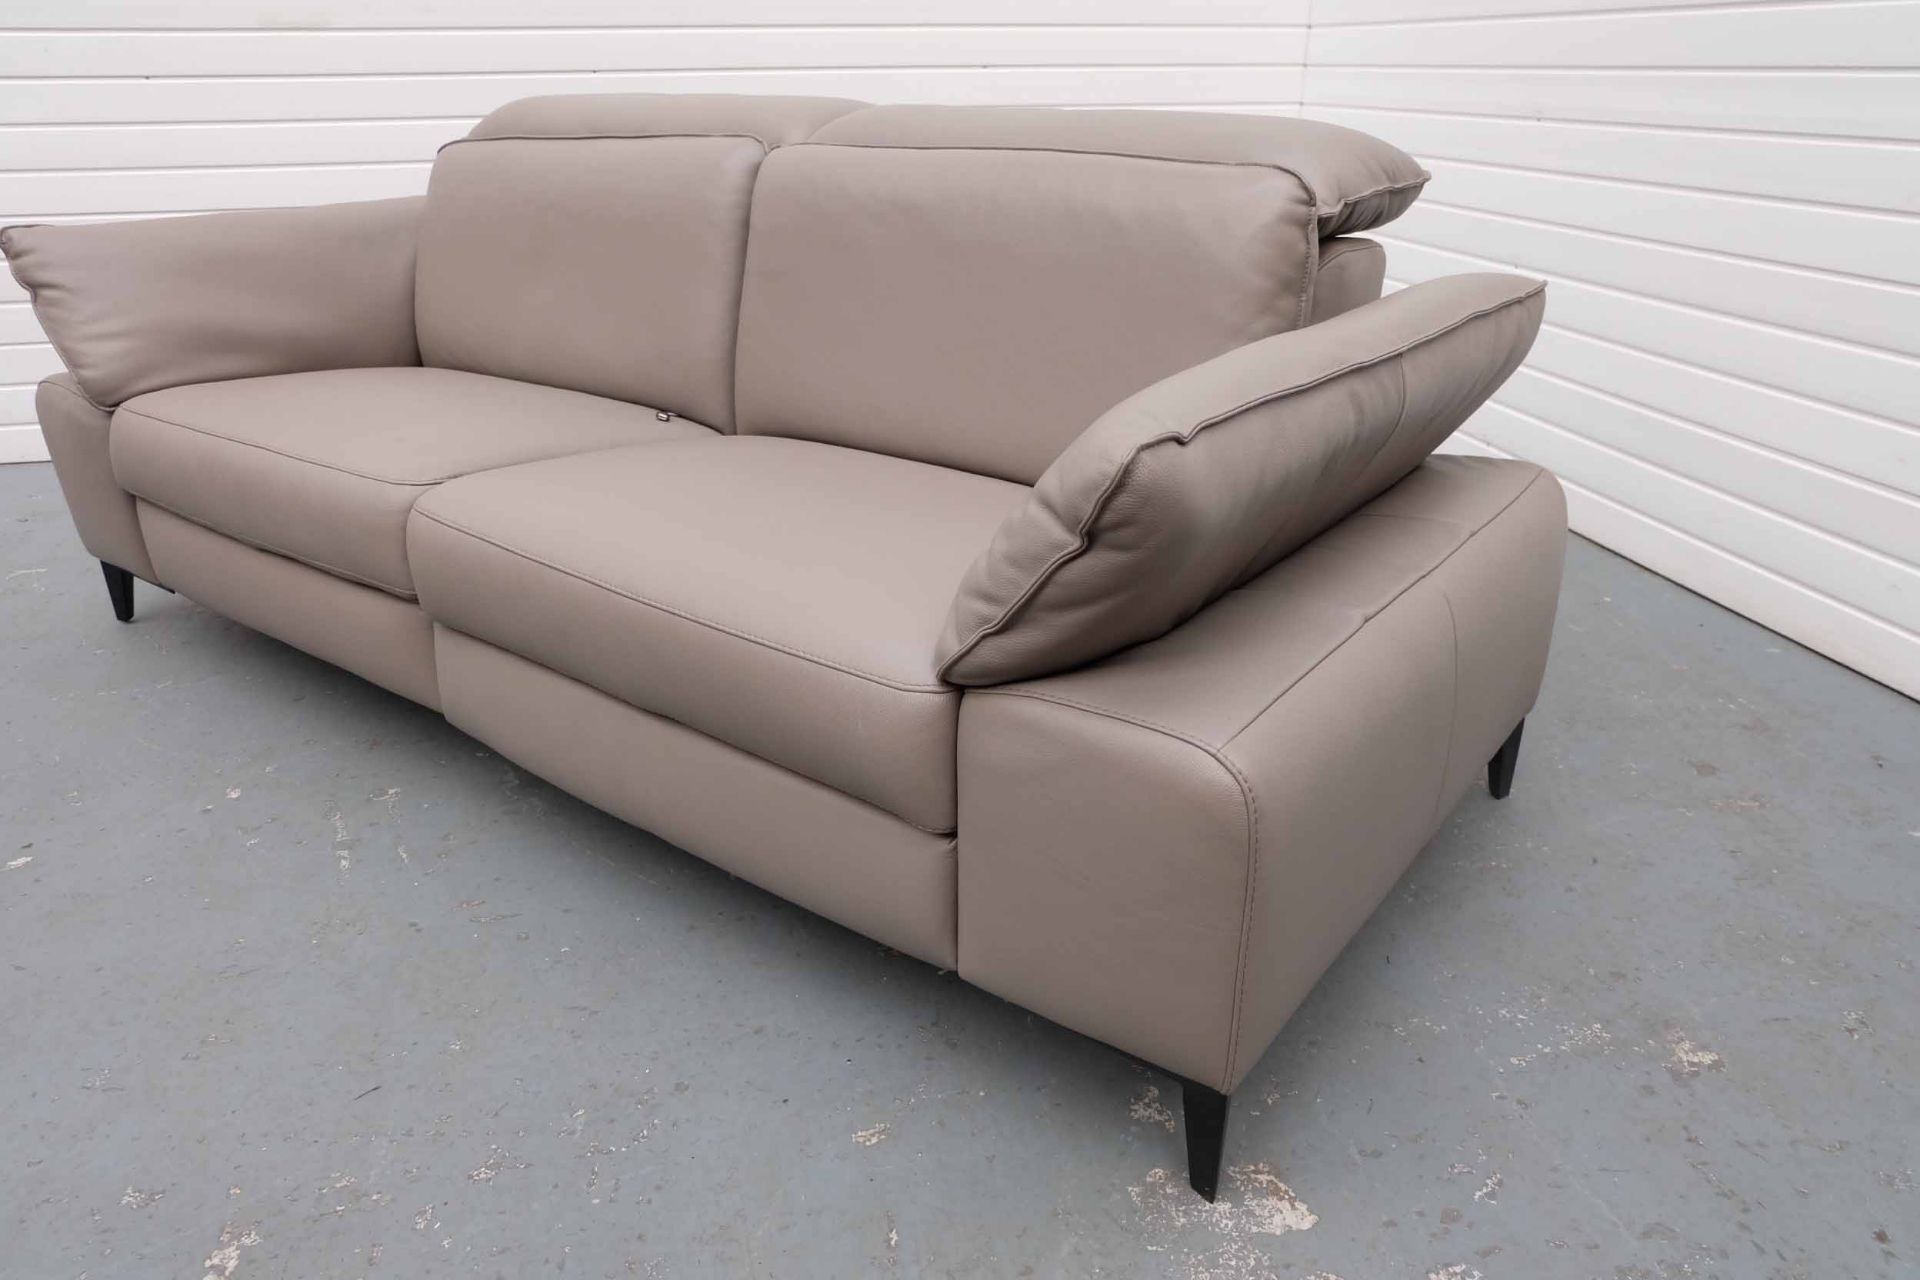 ROM 2 Seater Sofa. Fully Electric Reclining Seat. Manual Headrest. - Image 3 of 10